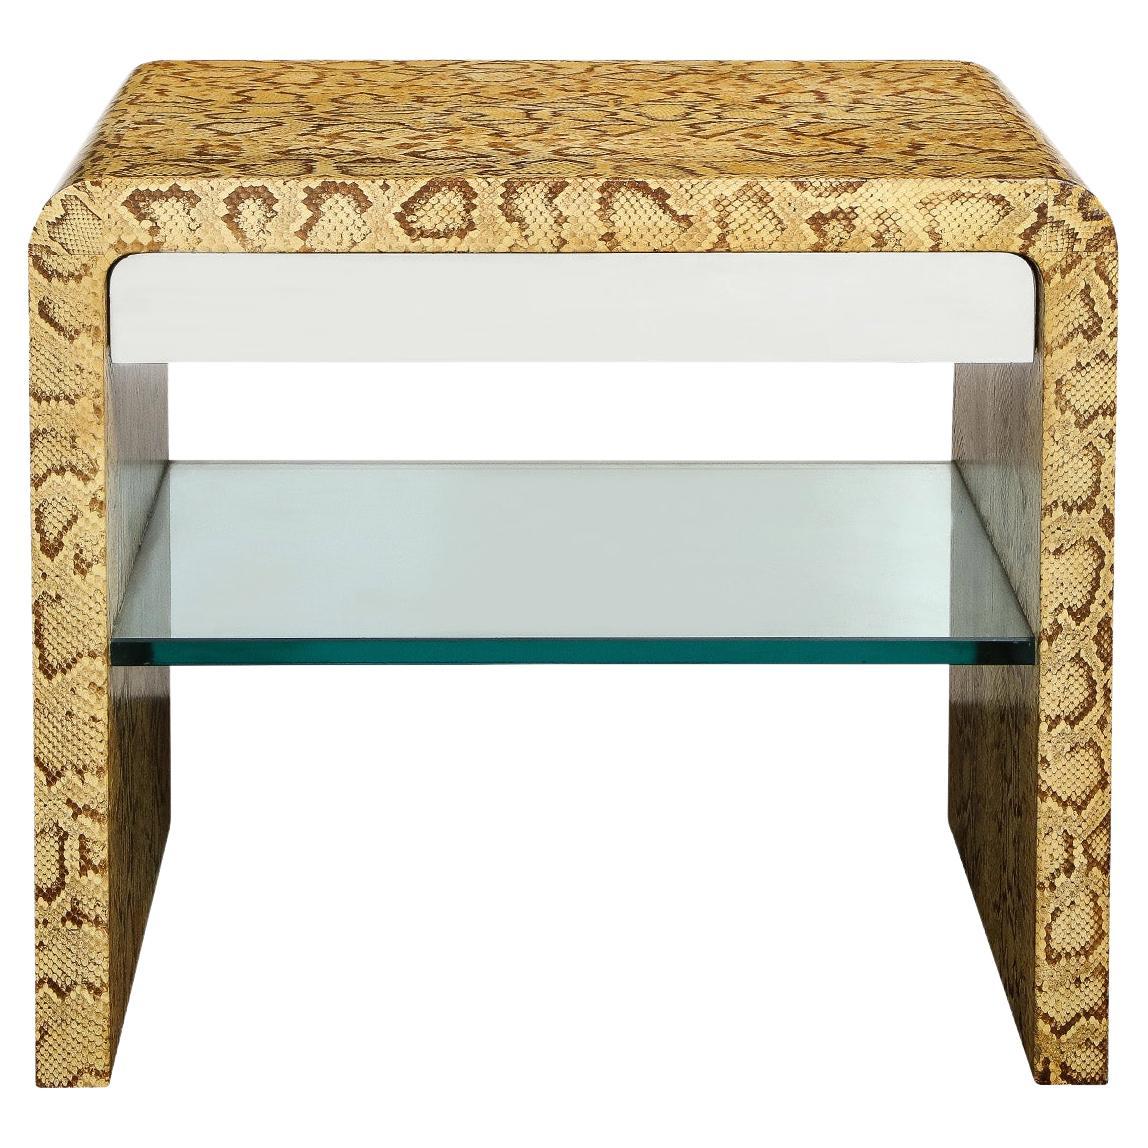 Karl Springer Waterfall Side Table in Python with Stainless Steel Drawer 1970s For Sale